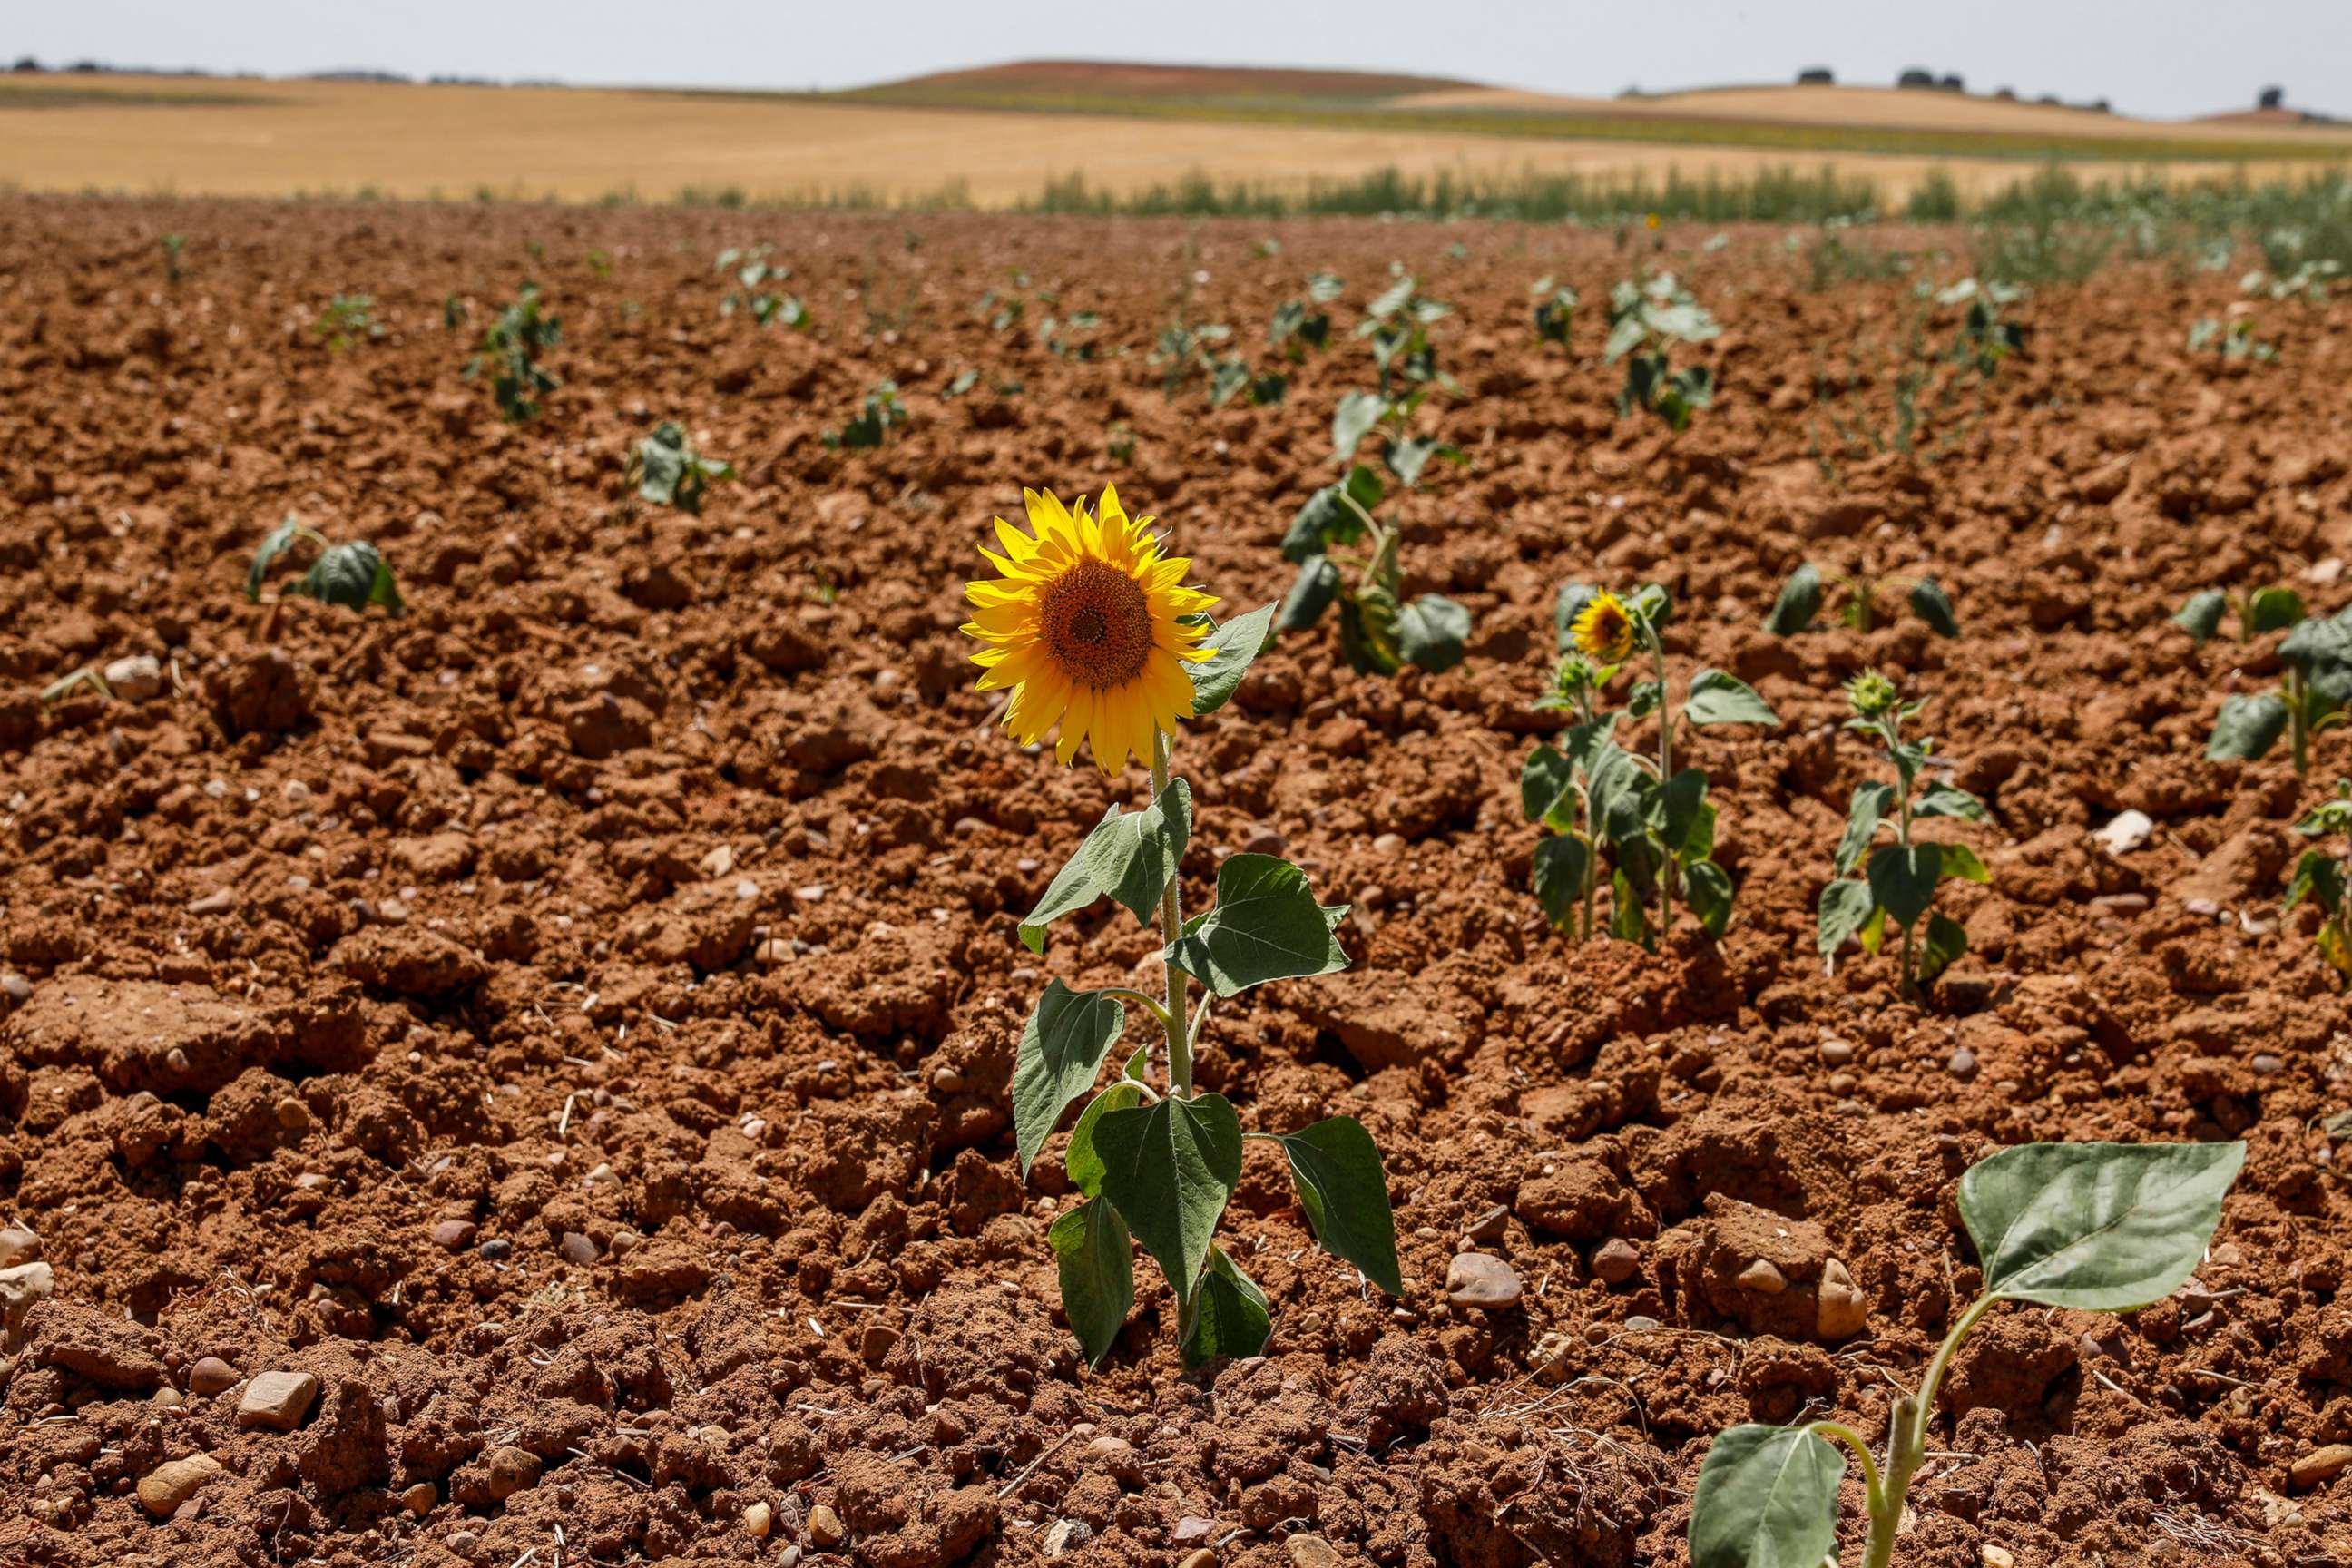 PHOTO: A sunflower grows in a field during drought, July 31, 2022.